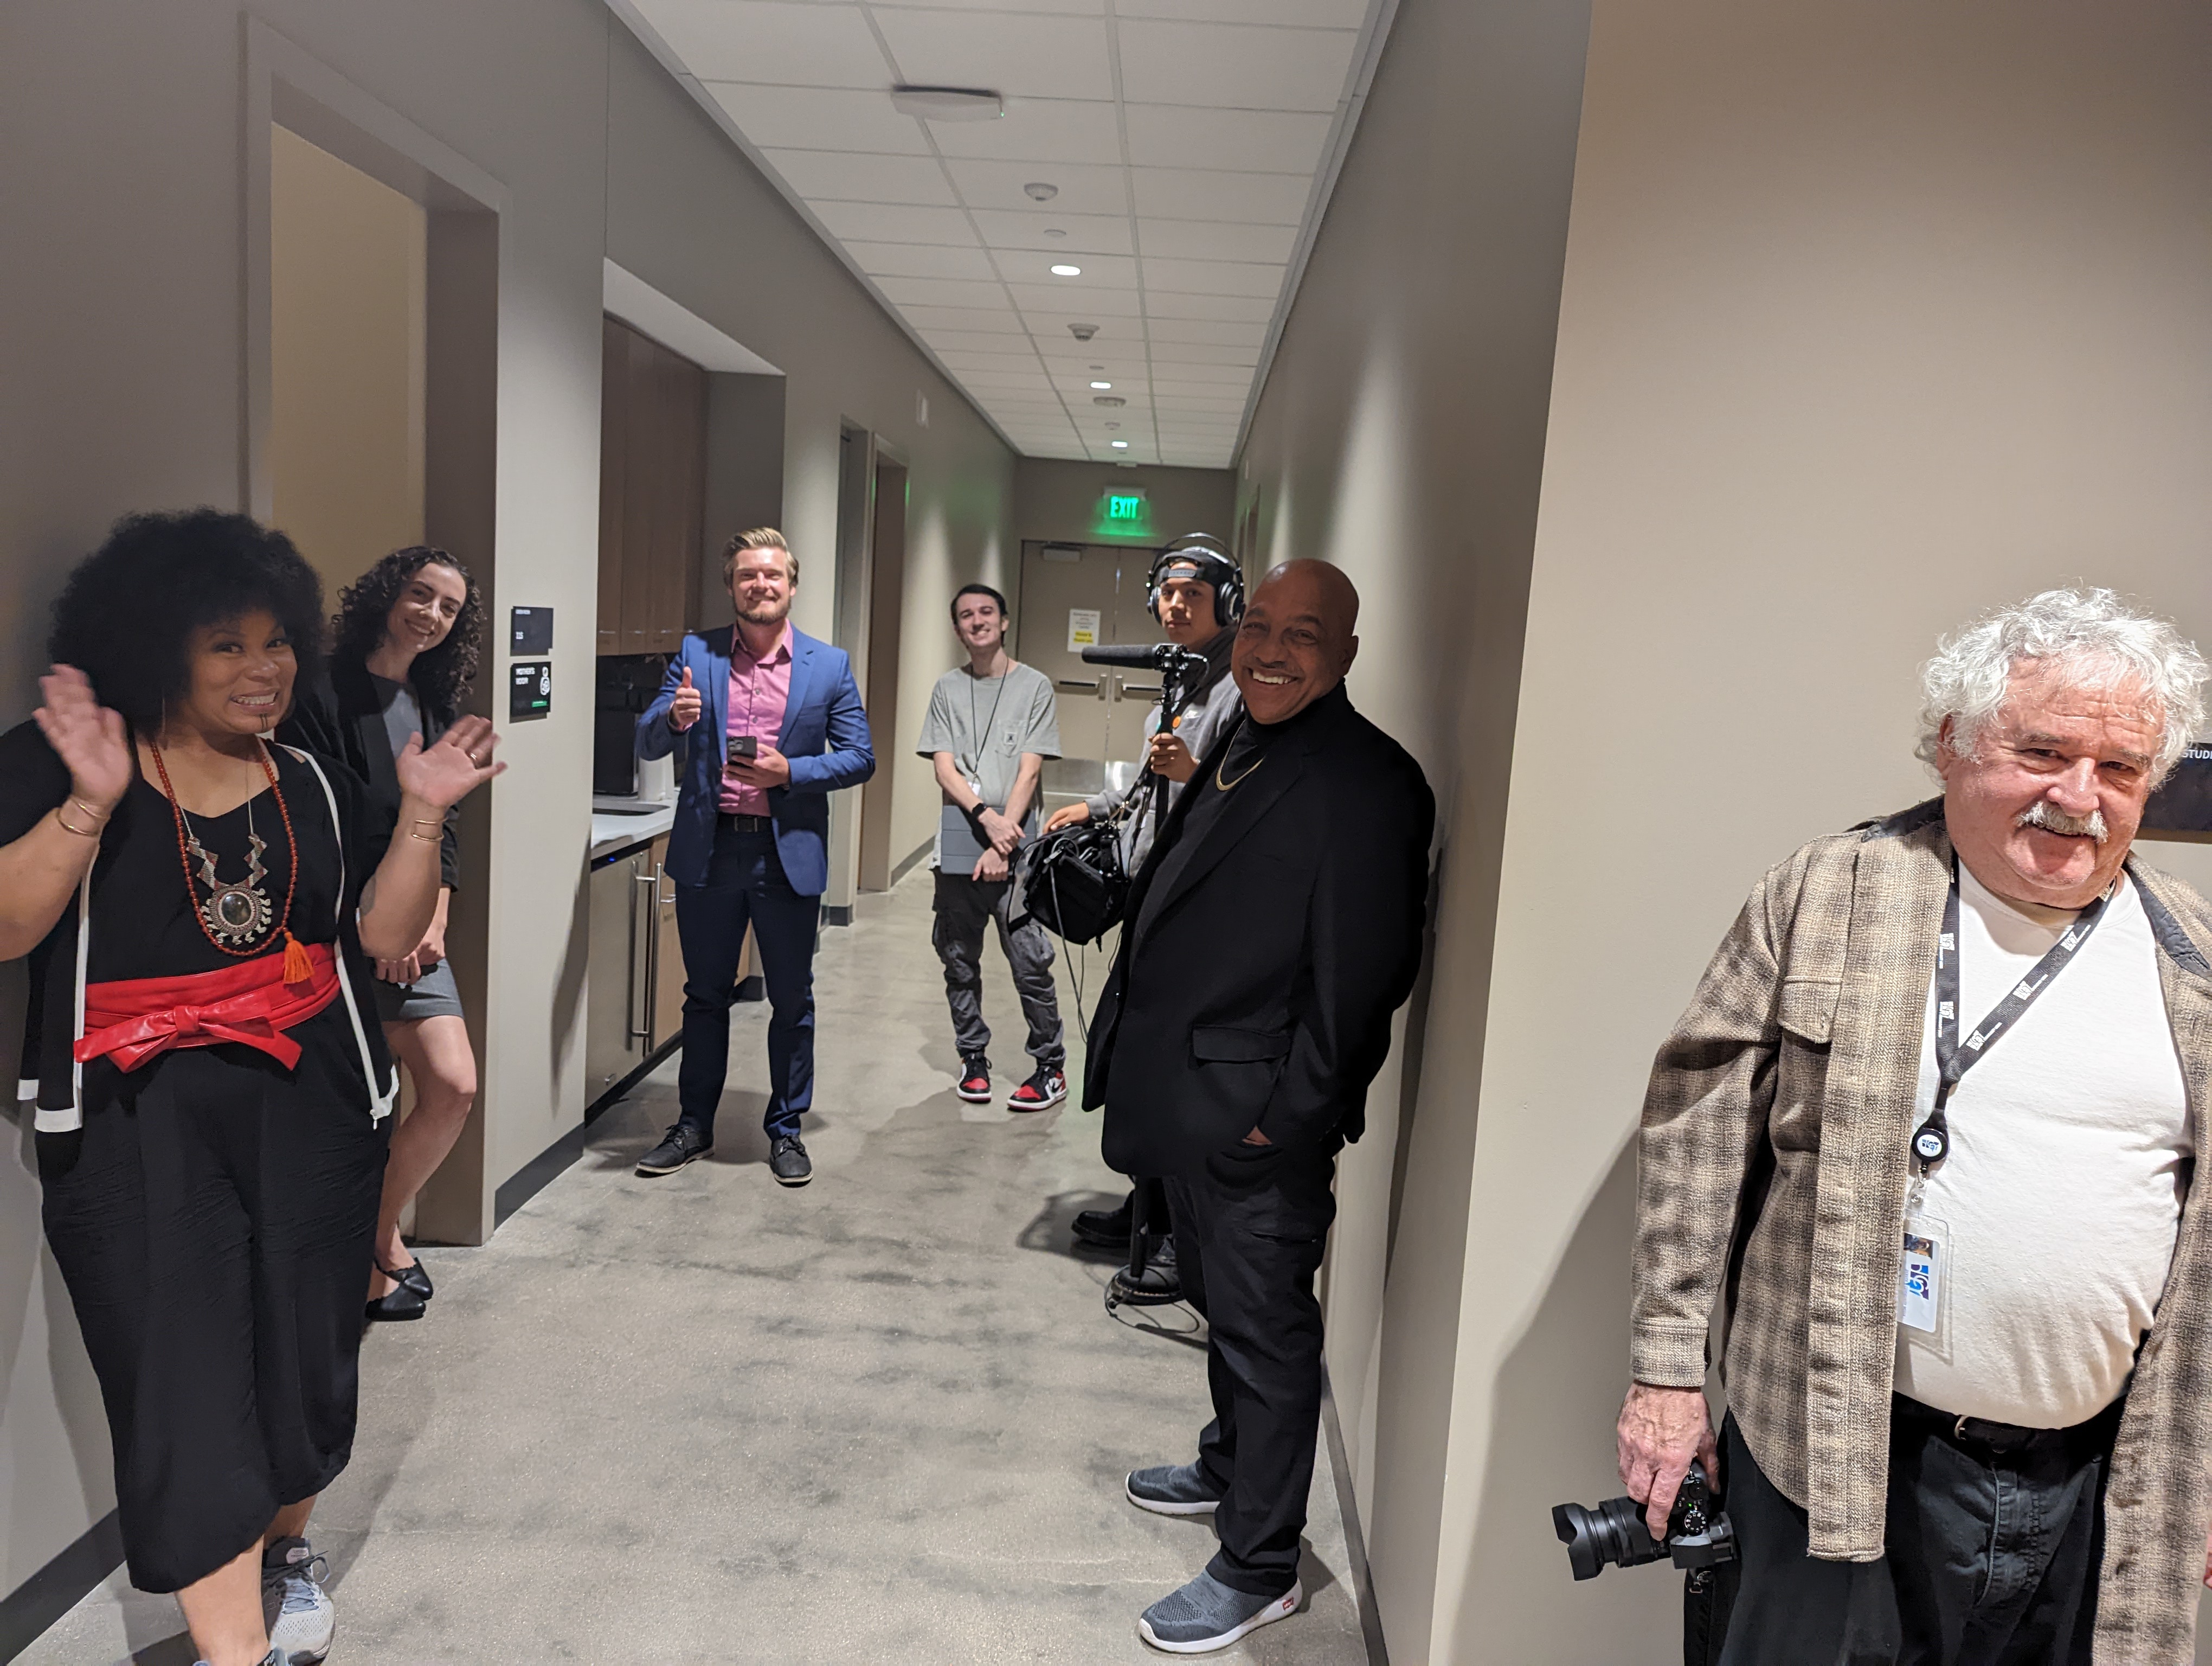 7 members of a production crew standing in a hallway waving